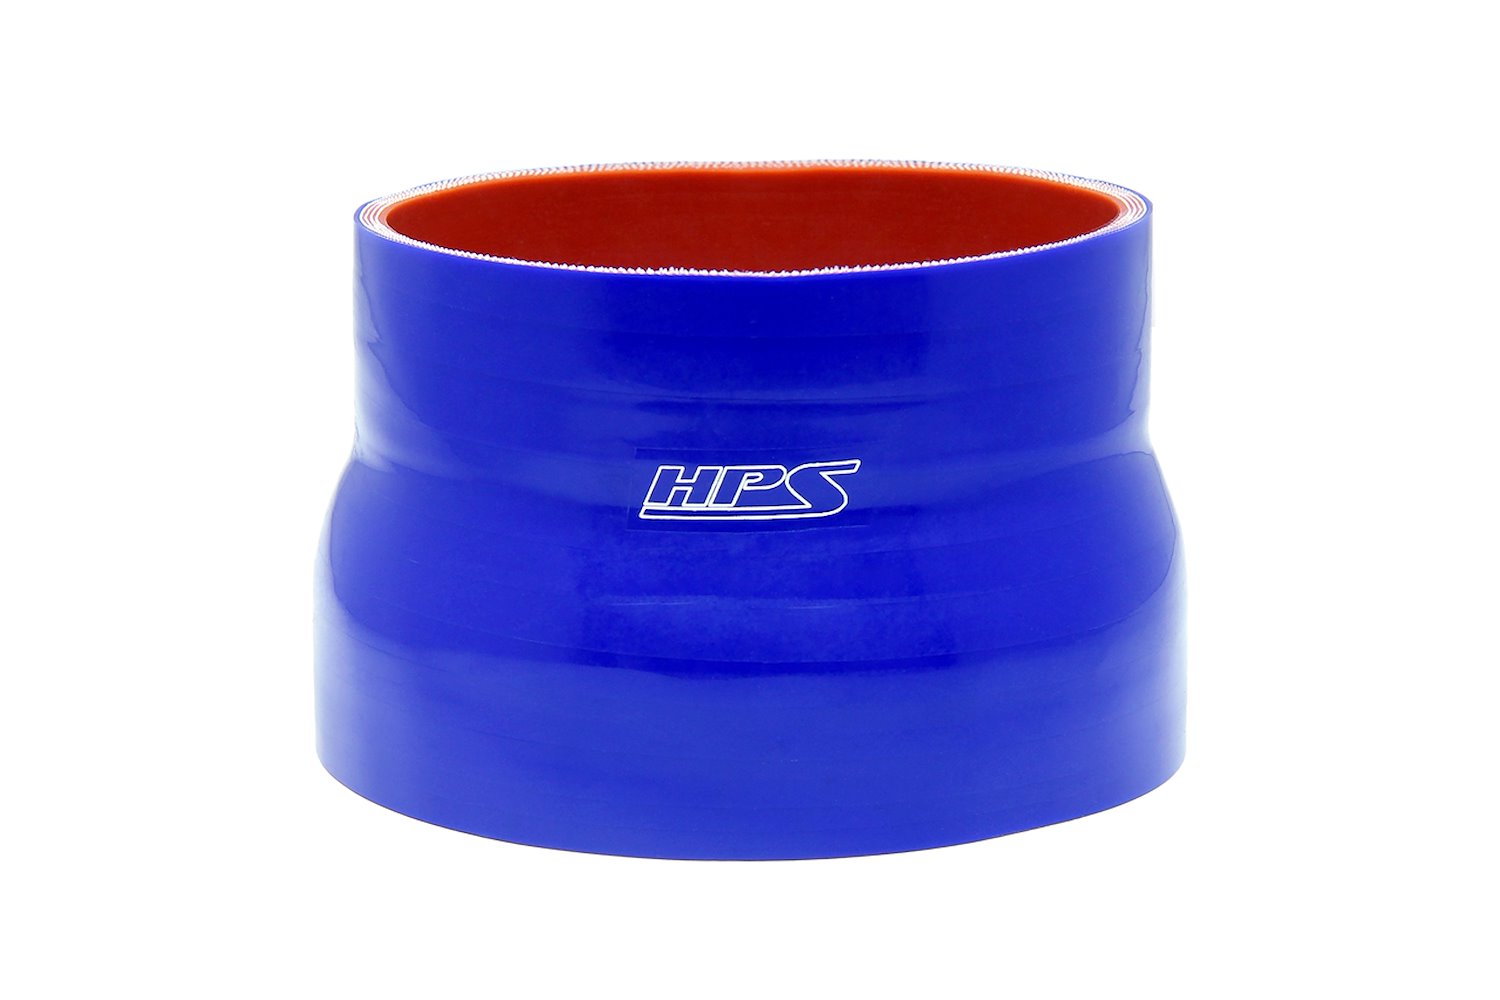 HTSR-425-500-L4-BLUE Silicone Reducer Hose, High-Temp 4-Ply Reinforced, 4-1/4 in. - 5 in. ID, 4 in. Long, Blue